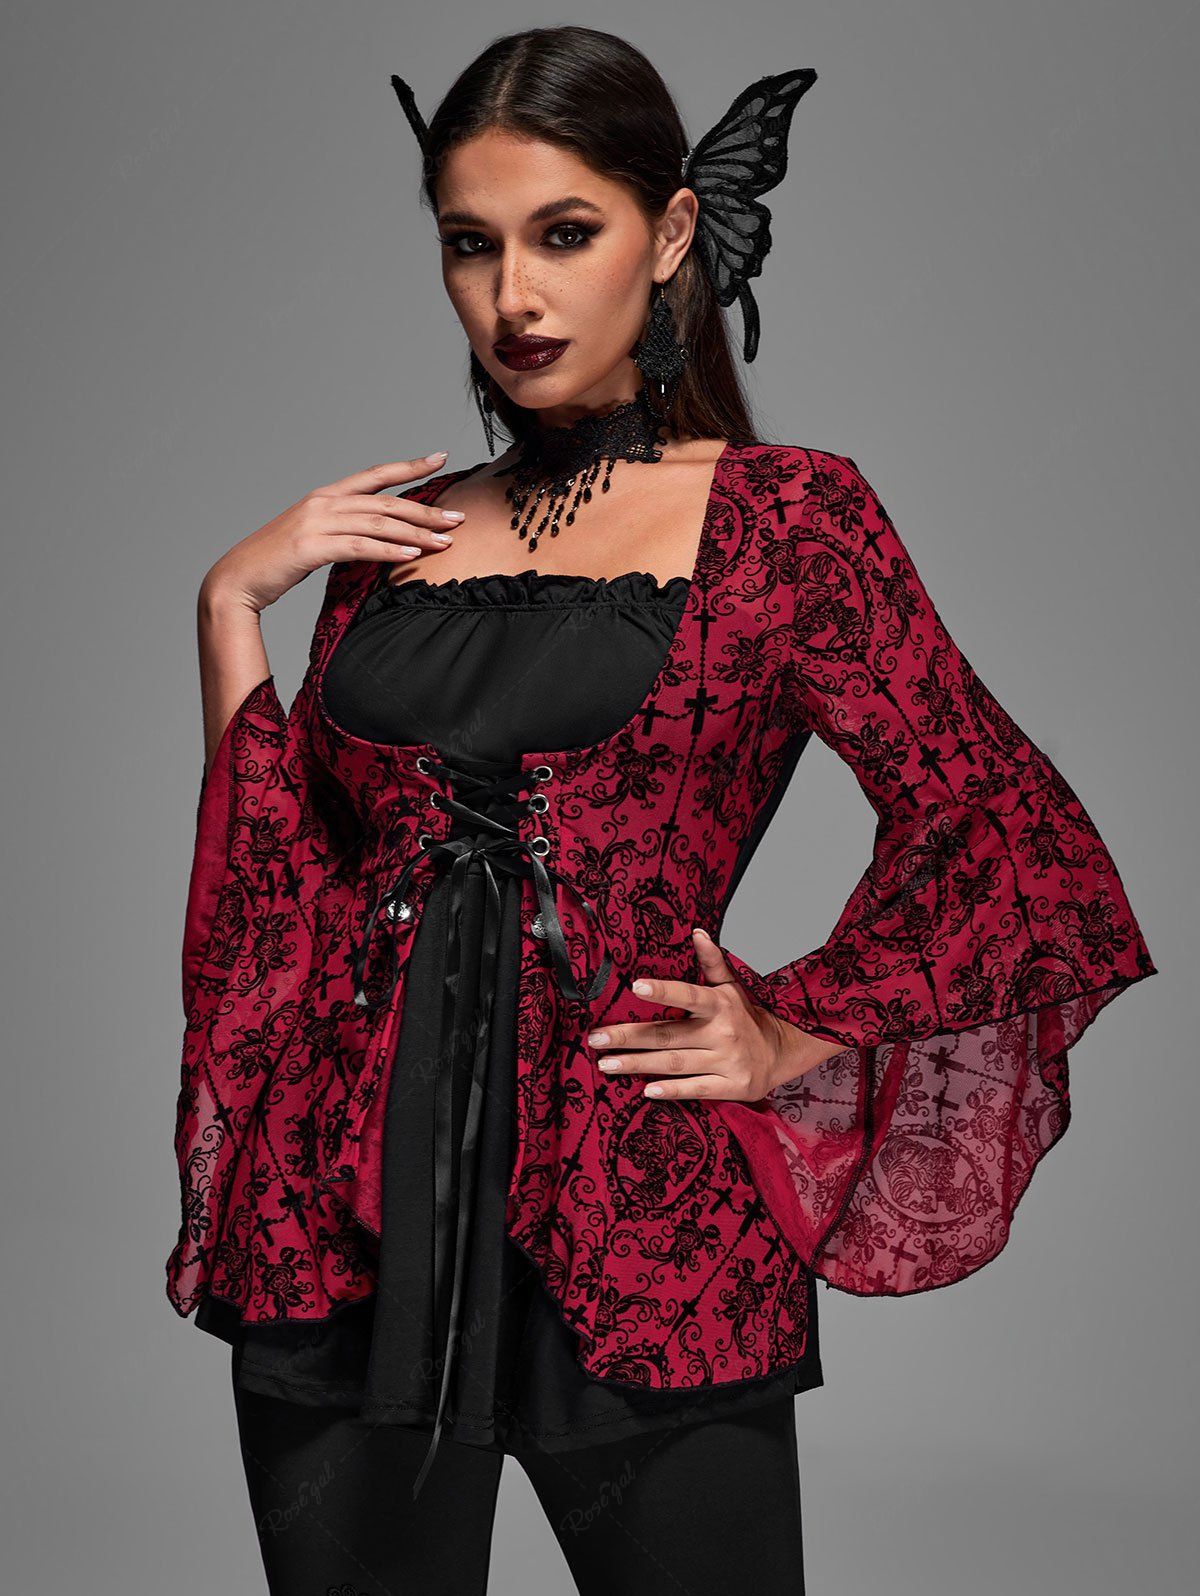 Gothic Bell Sleeves Cross Floral Mesh Flocking Lace Up Ruched Ruffles 2 in 1 Long Sleeves Top